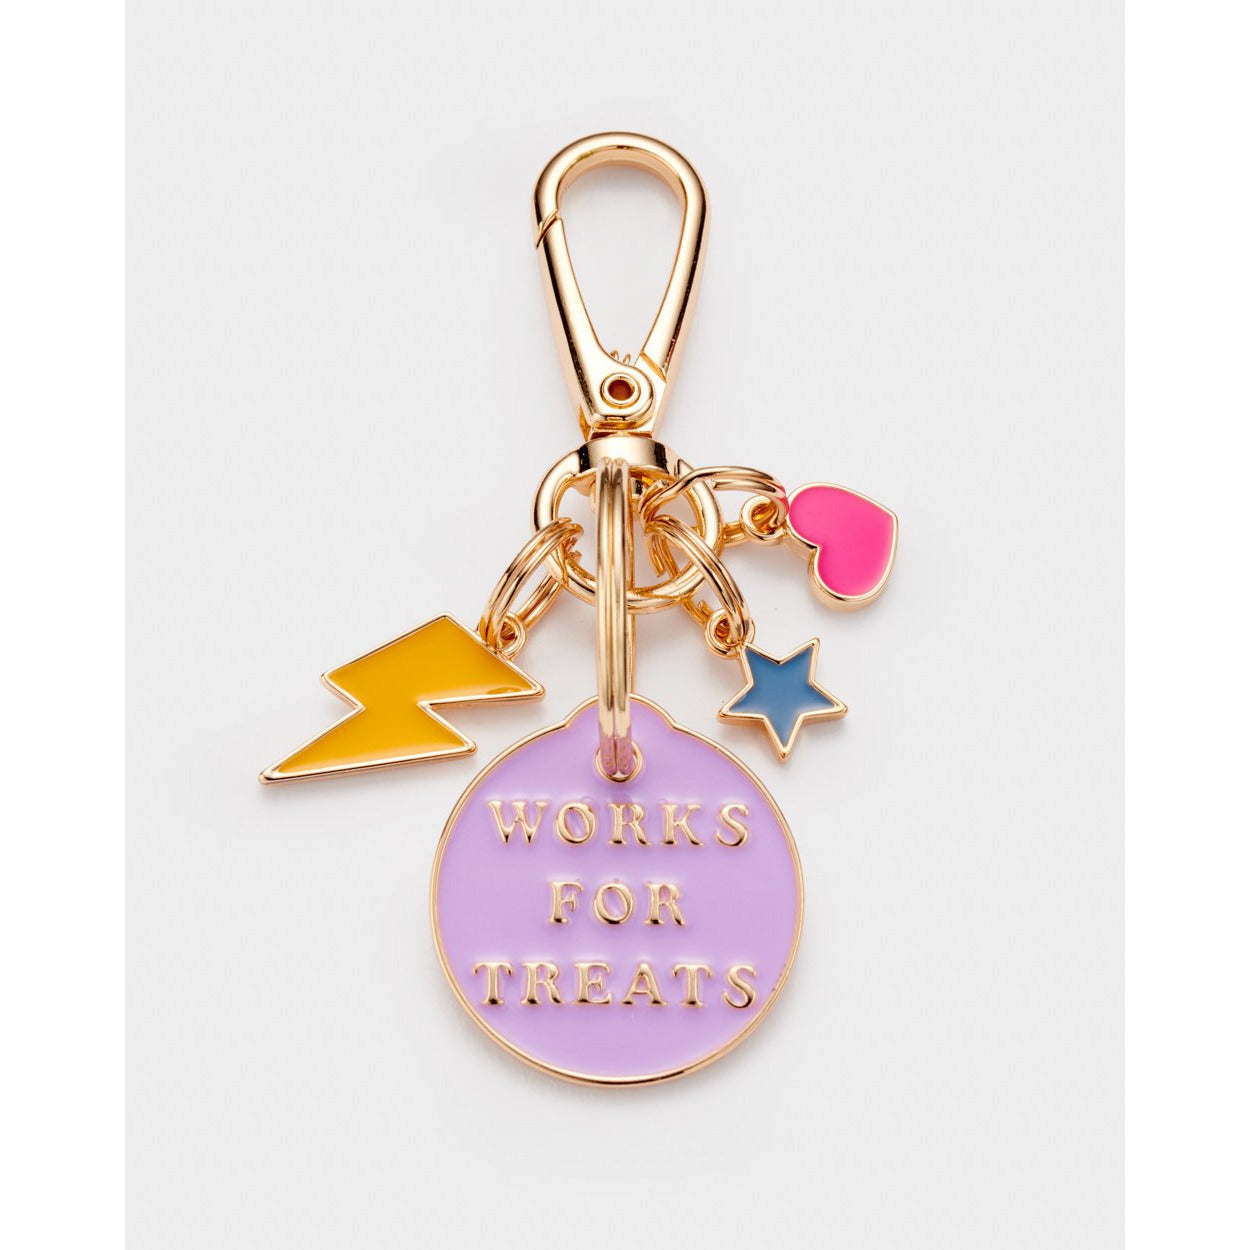 Works For Treats Dog Charm